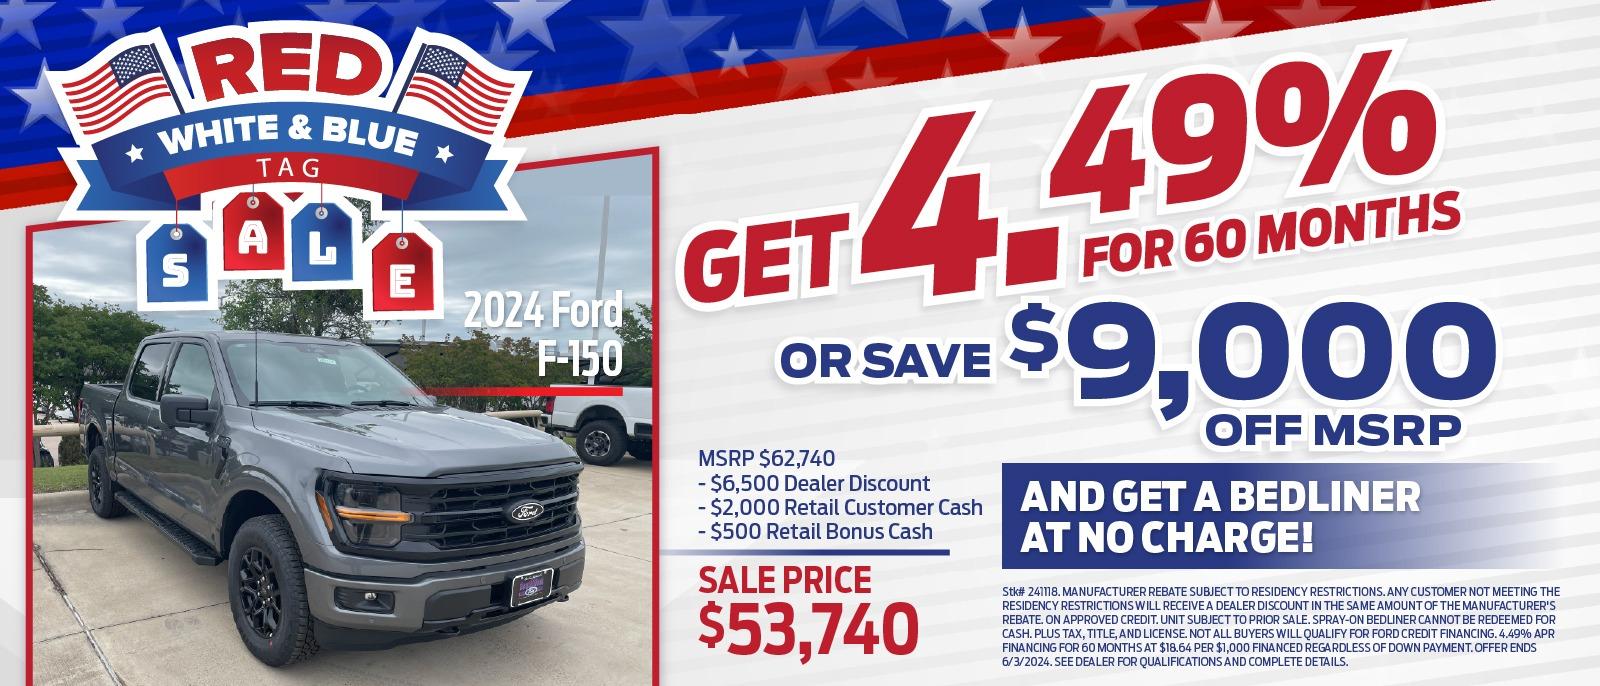 2024 Ford F-150
Get 4.49% for 60 months
Or save $8,000 Off MSRP